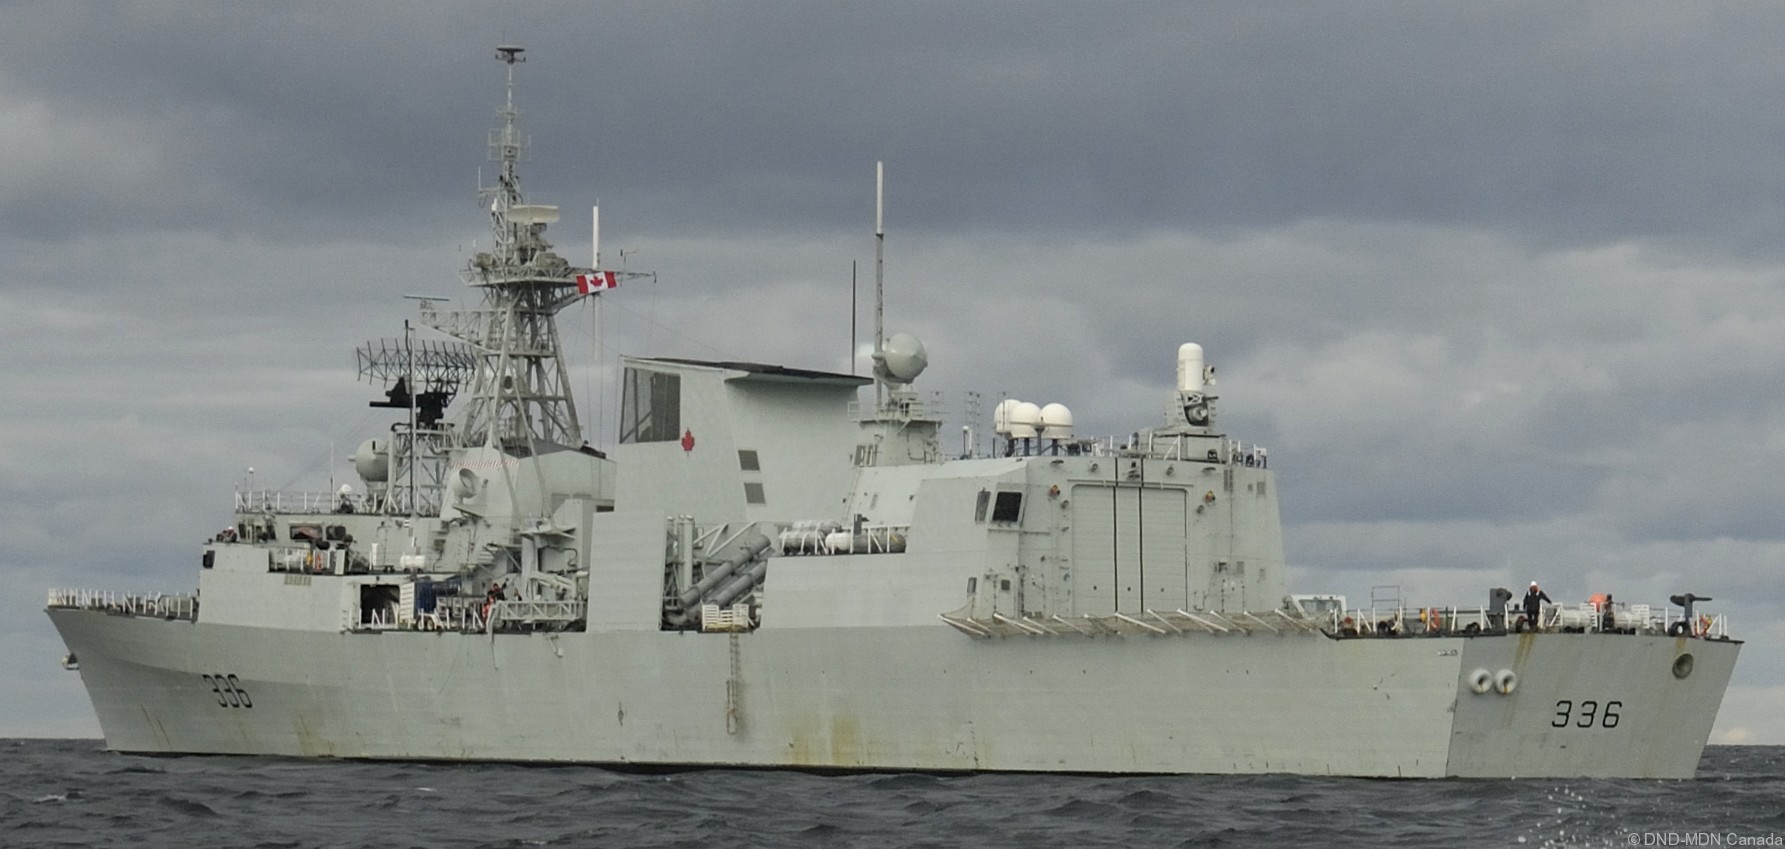 ffh-336 hmcs montreal halifax class helicopter patrol frigate ncsm royal canadian navy 49